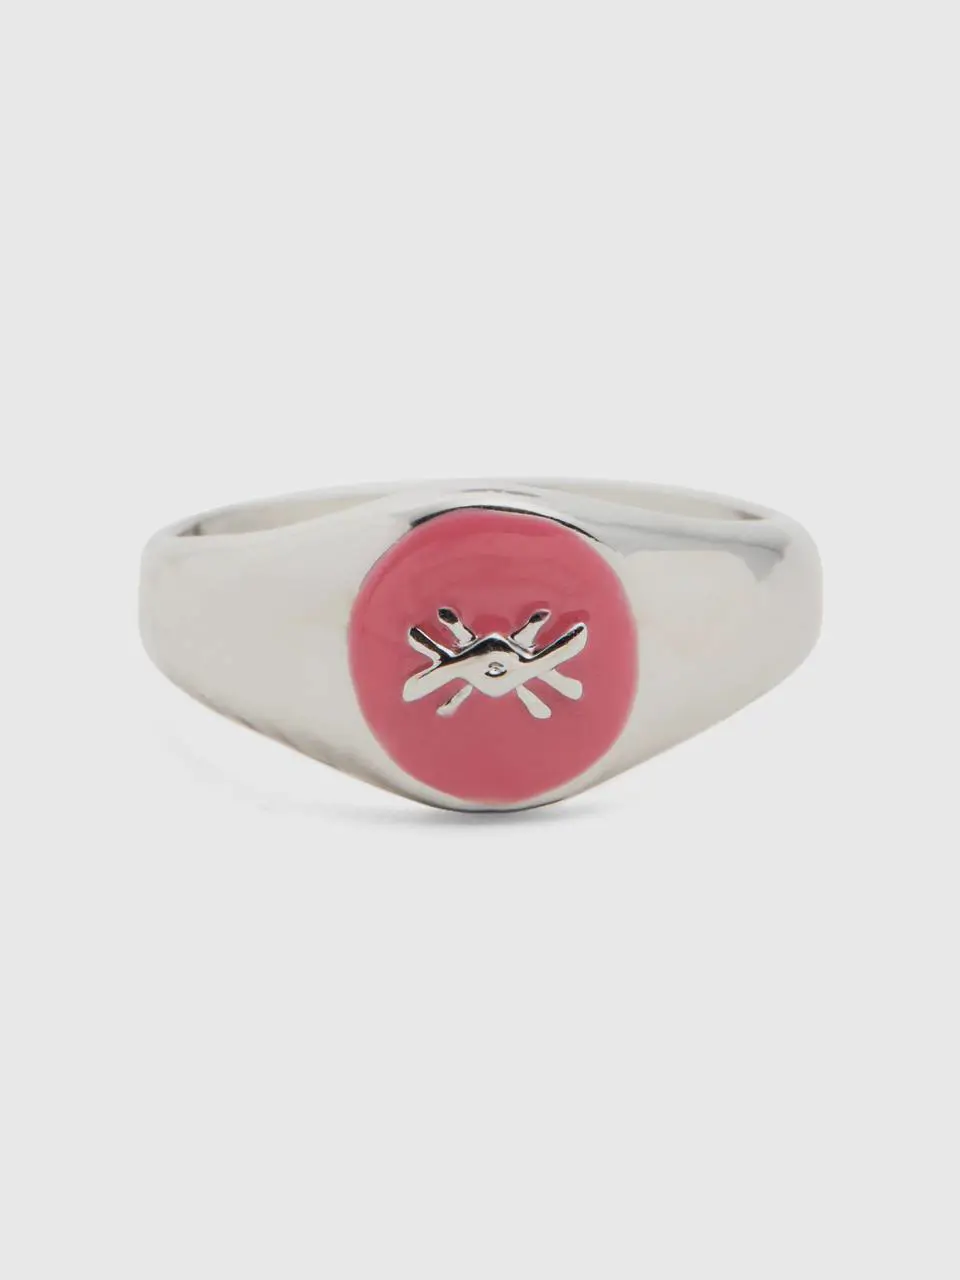 Benetton pink ring with logo. 1